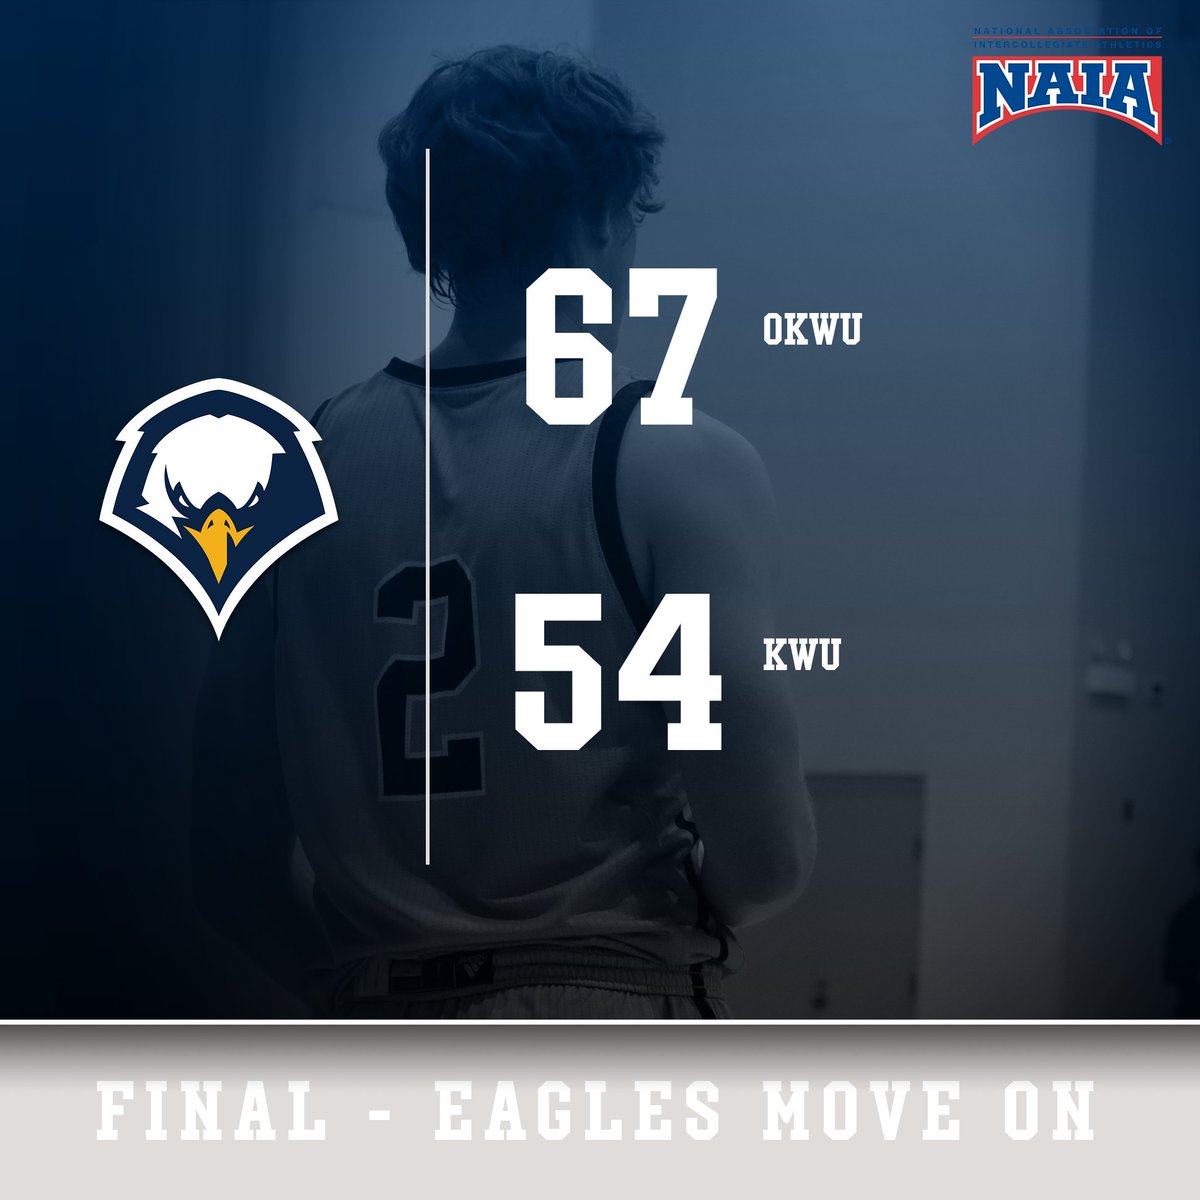 .@OKWUeagles_MBB advance to Kansas City with a win over Kansas Wesleyan. 14 points for Brandon Bird, 13 for Dylan Phillip, and a double-double for Jaden Lietzke to power the Eagles. #weareOKWU